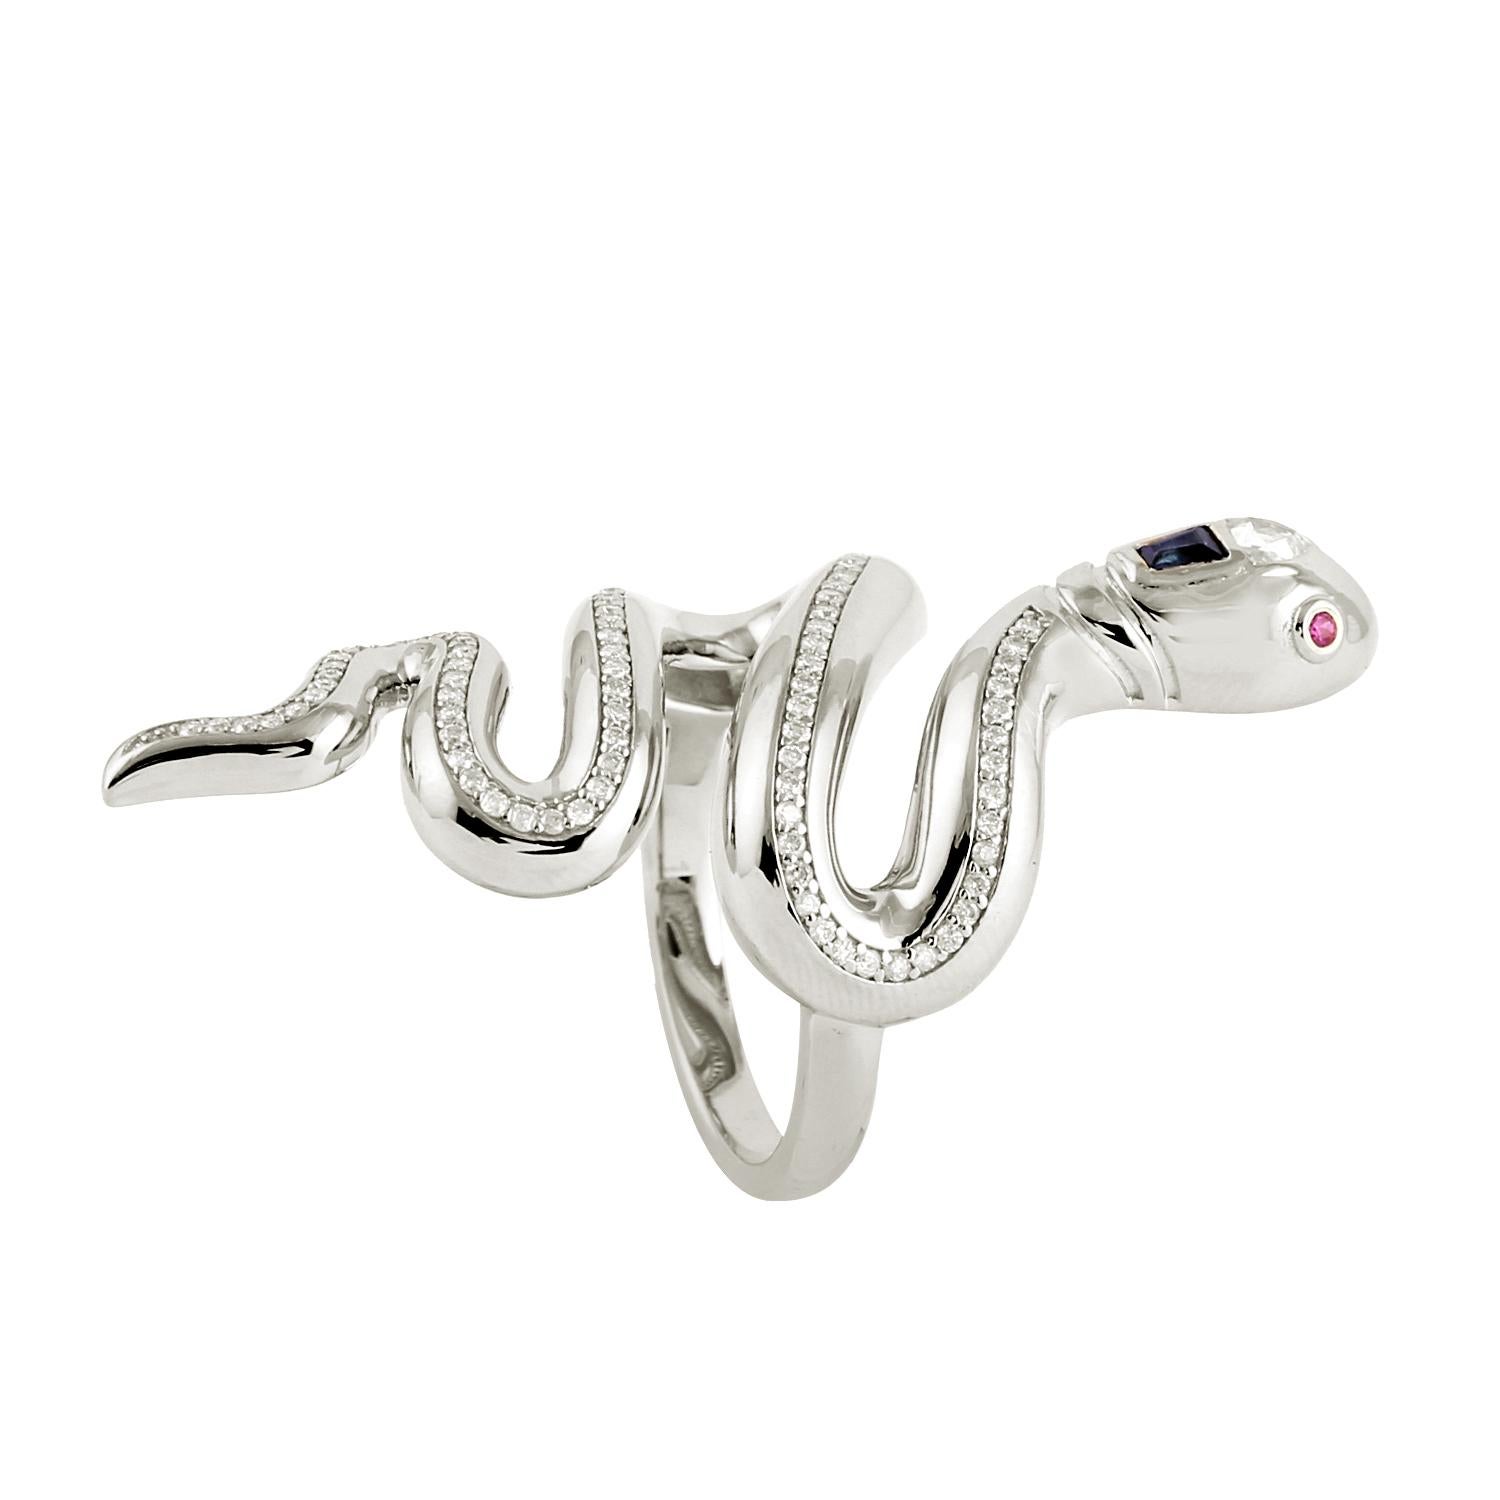 Mixed Cut Snake Shaped Ring With Ruby , Sapphire & Diamonds Made In 14k White Gold For Sale